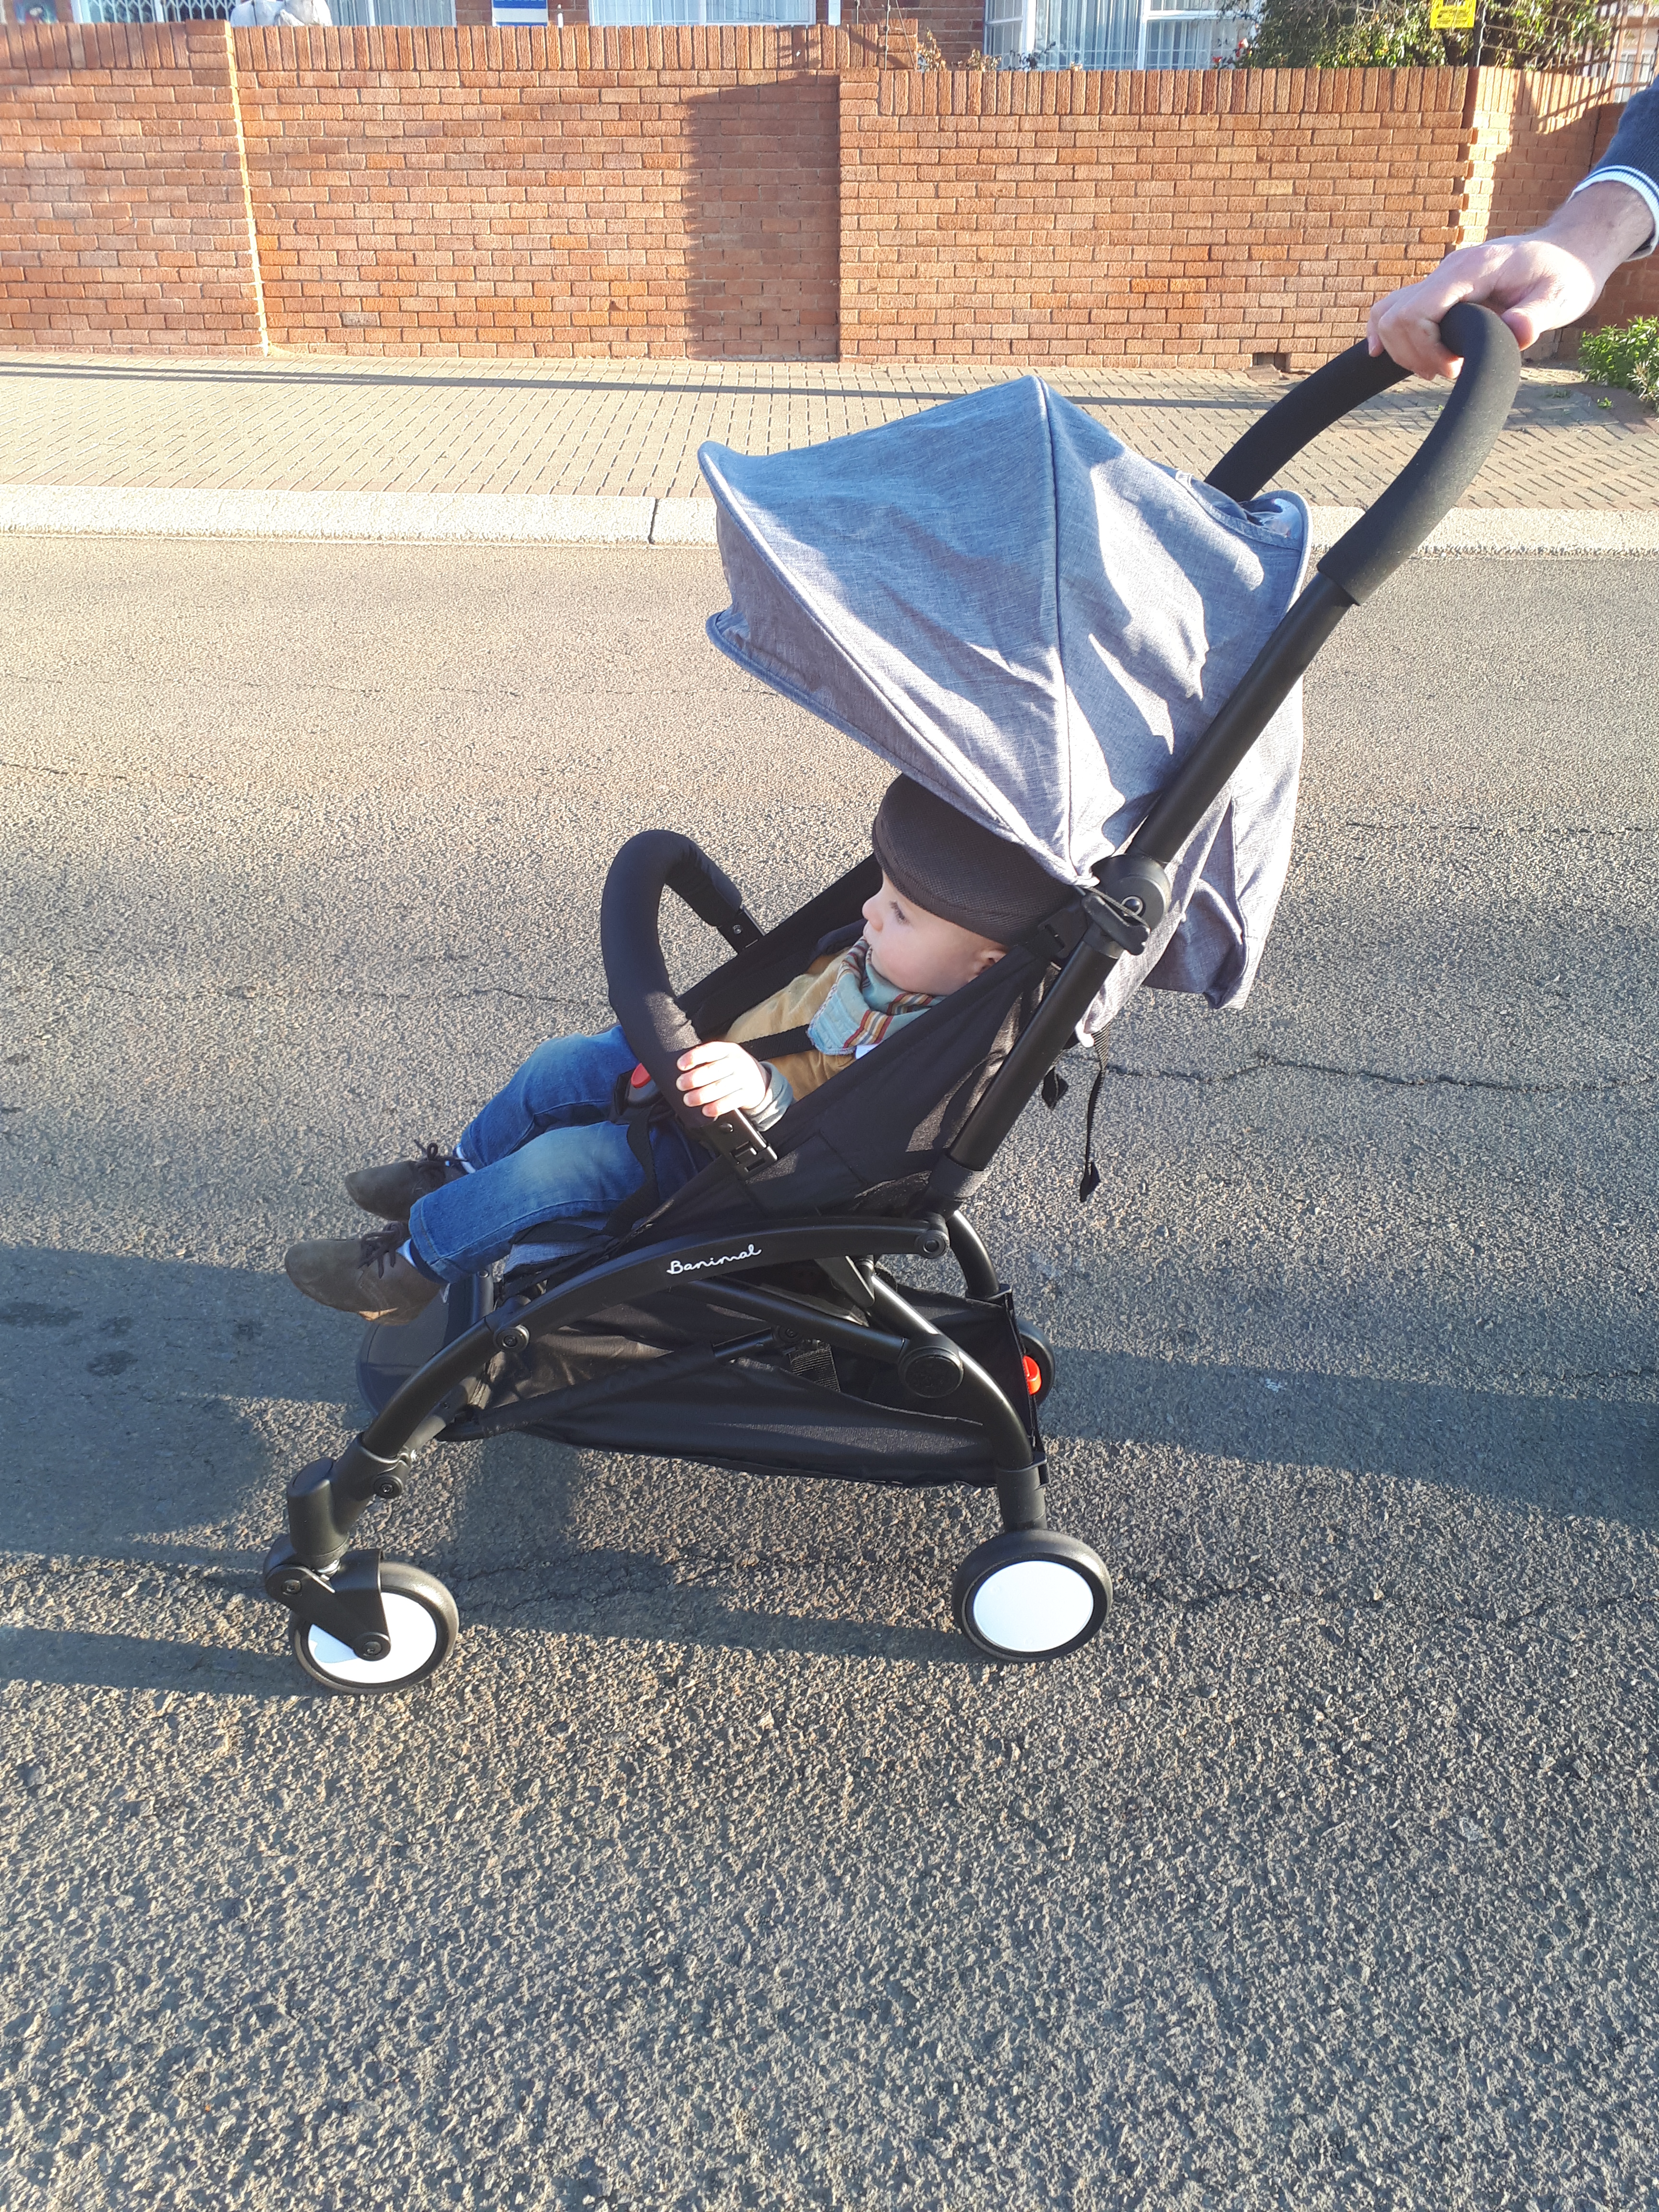 compact stroller reviews